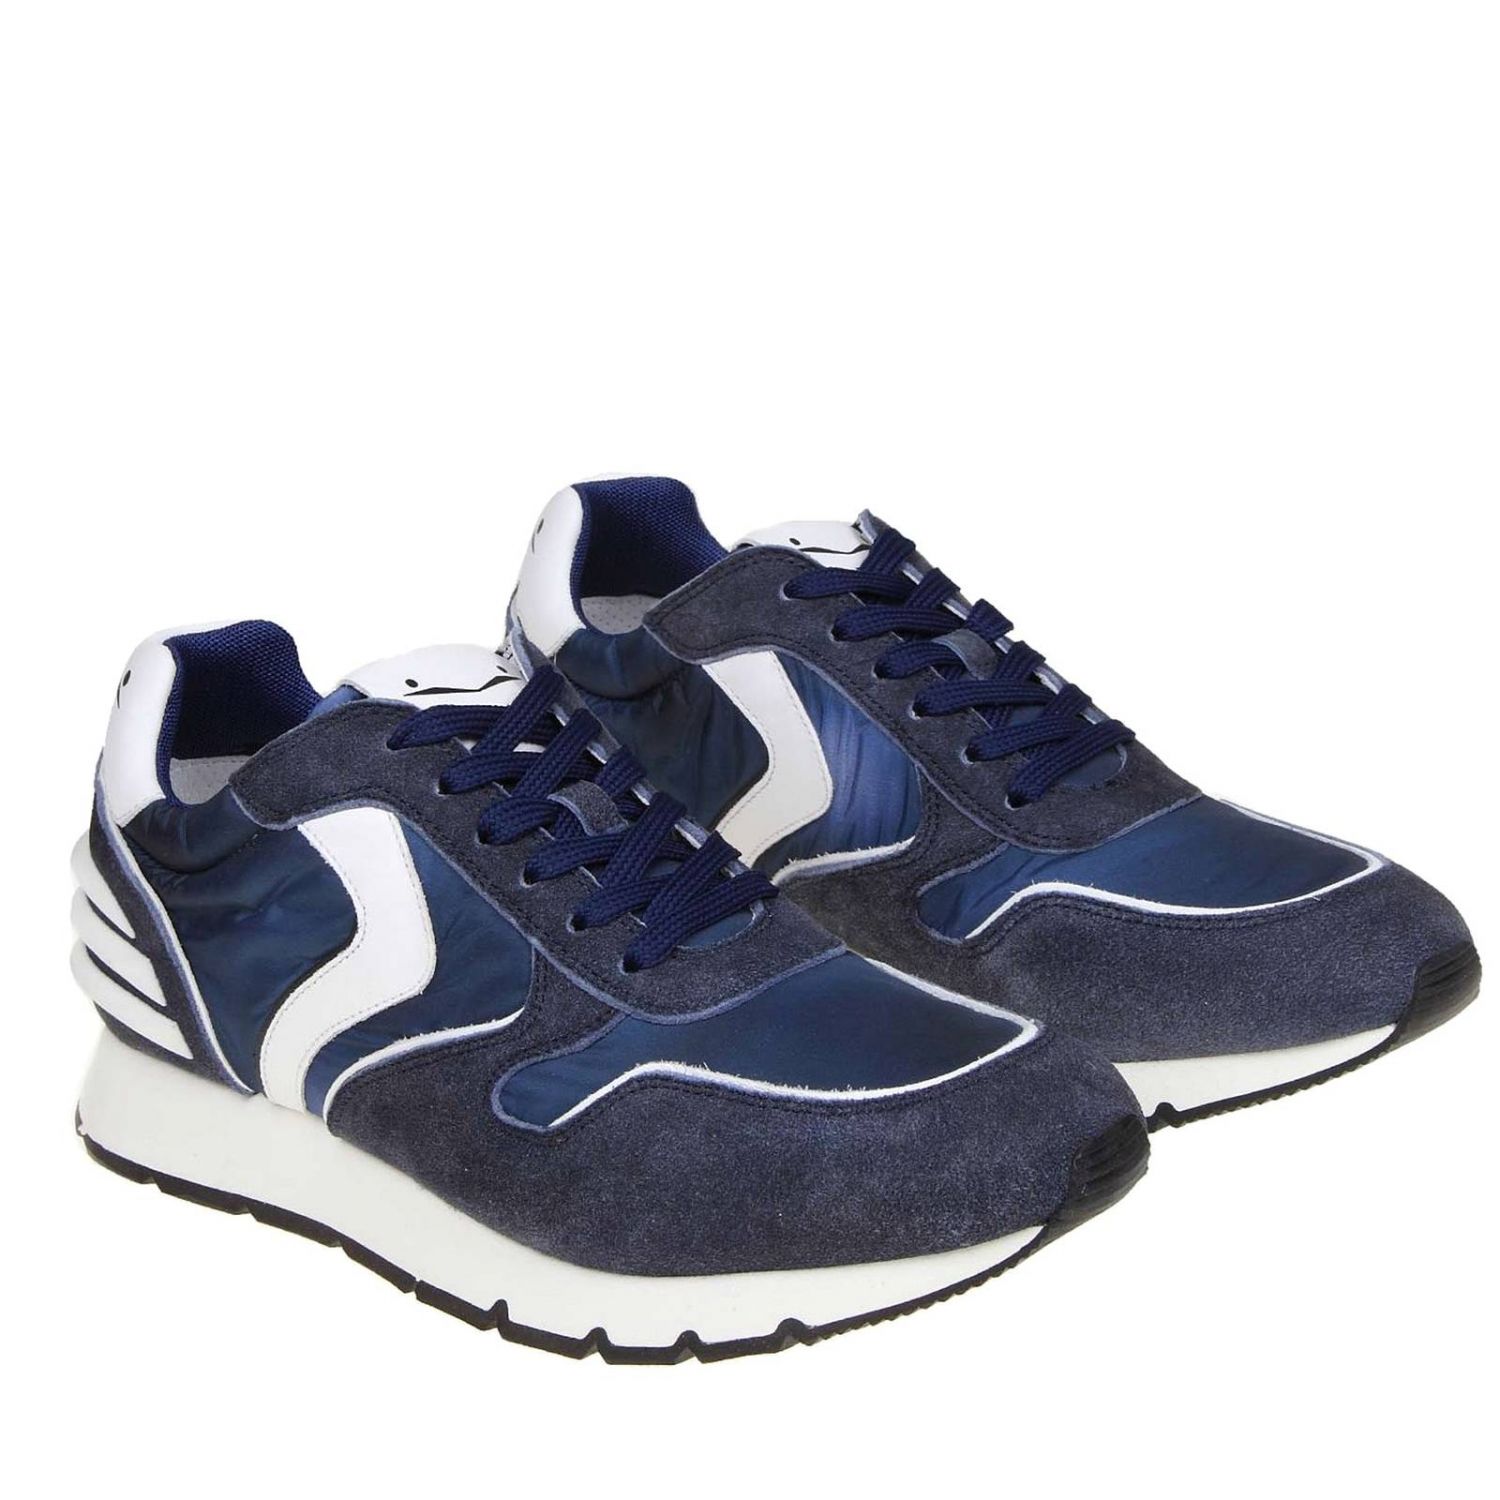 Voile Blanche Outlet: Sneakers men - Blue | Sneakers Voile Blanche ...